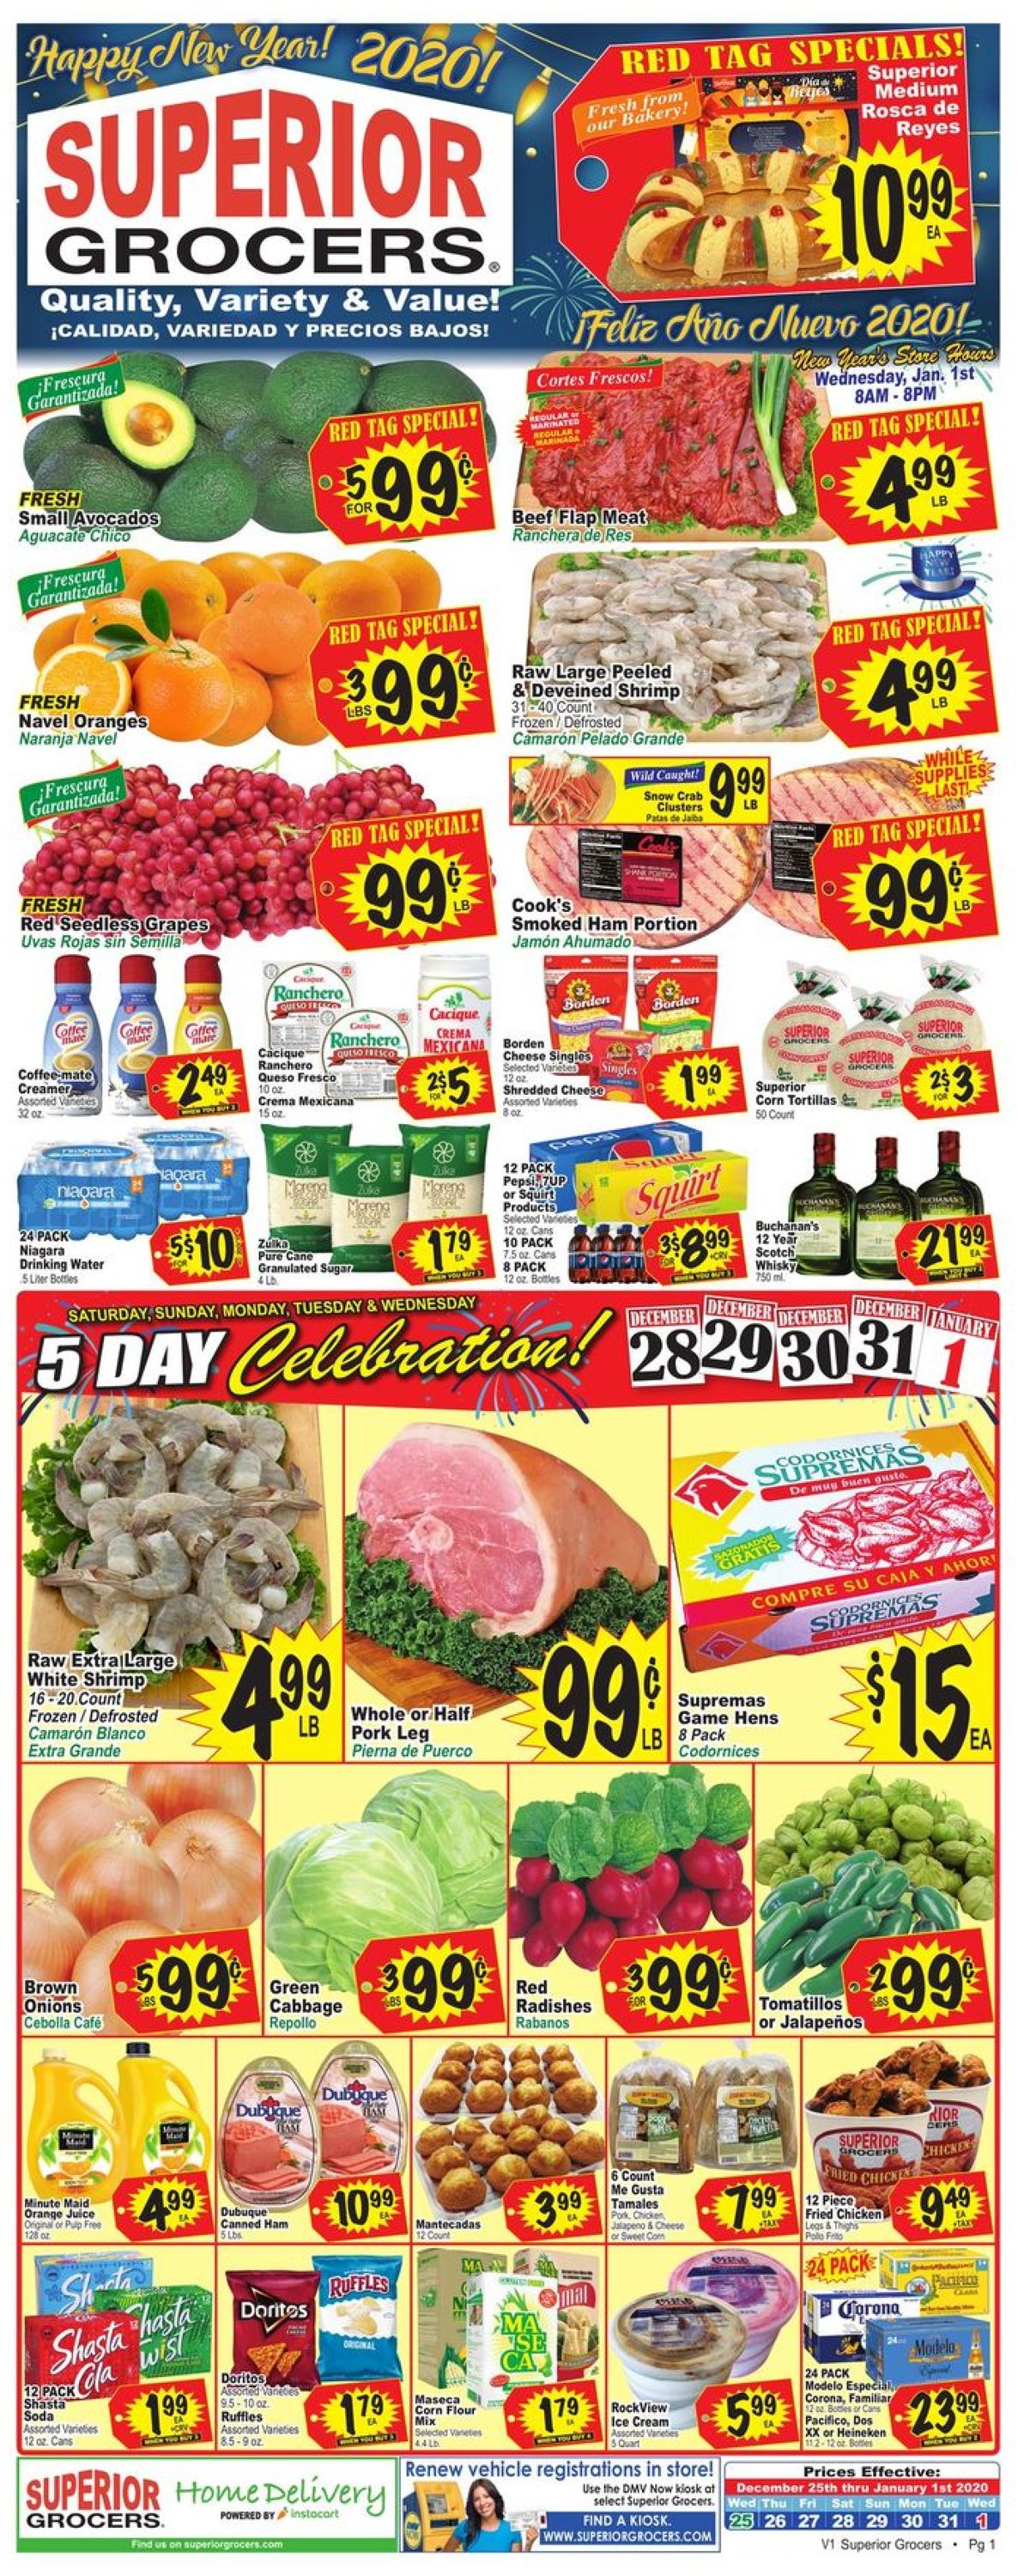 Catalogue Superior Grocers - New Year's Ad 2019/2020 from 12/25/2019